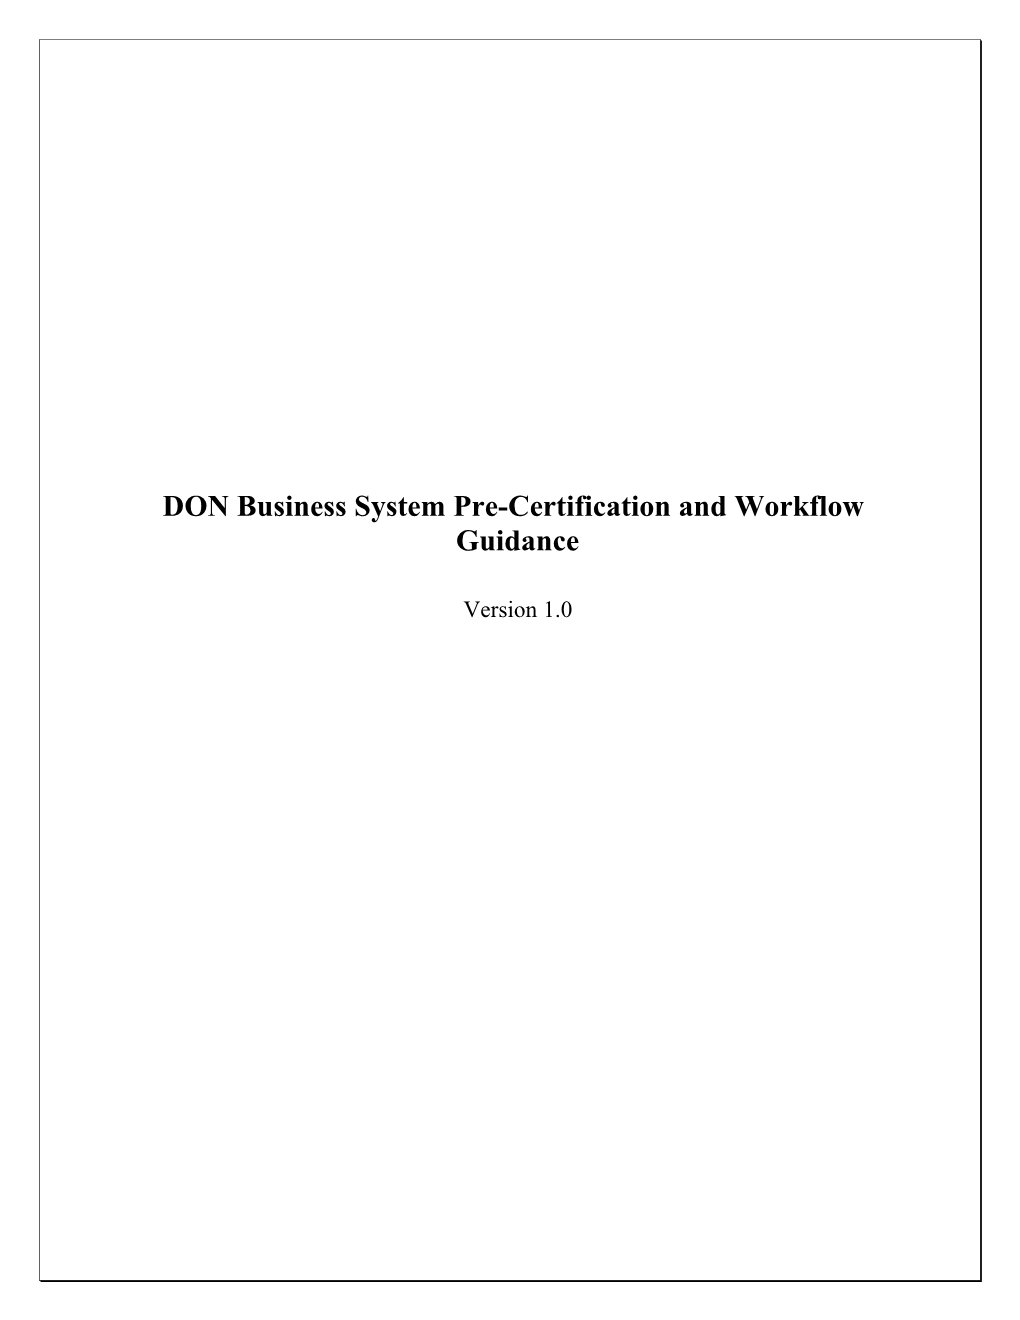 DON Pre-Certification Guidance